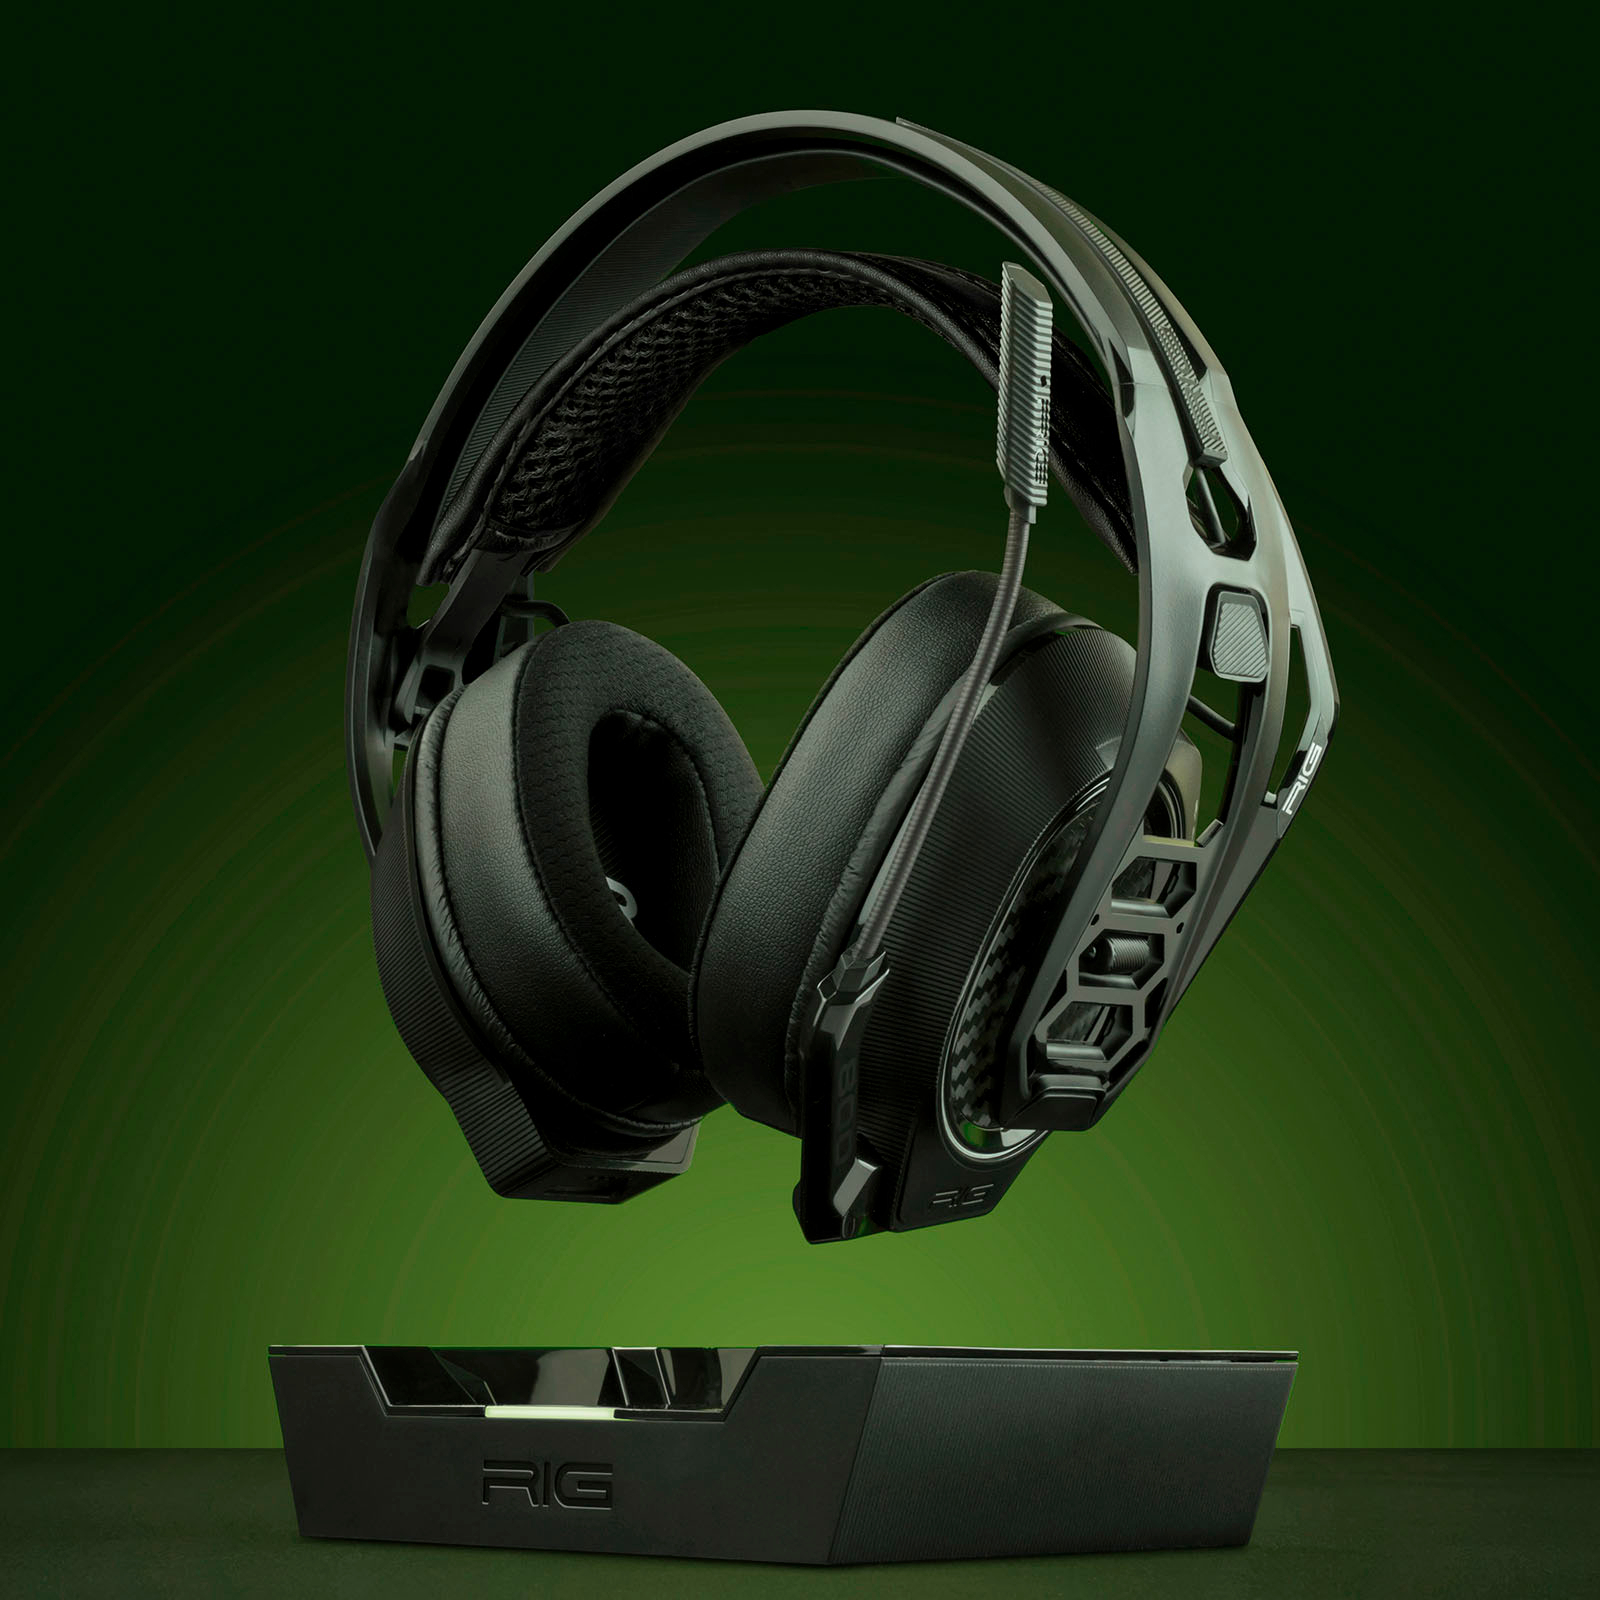 Gaming Xbox for HX Wireless Best Headset 800 Black 10-1172-01 - Buy Pro RIG